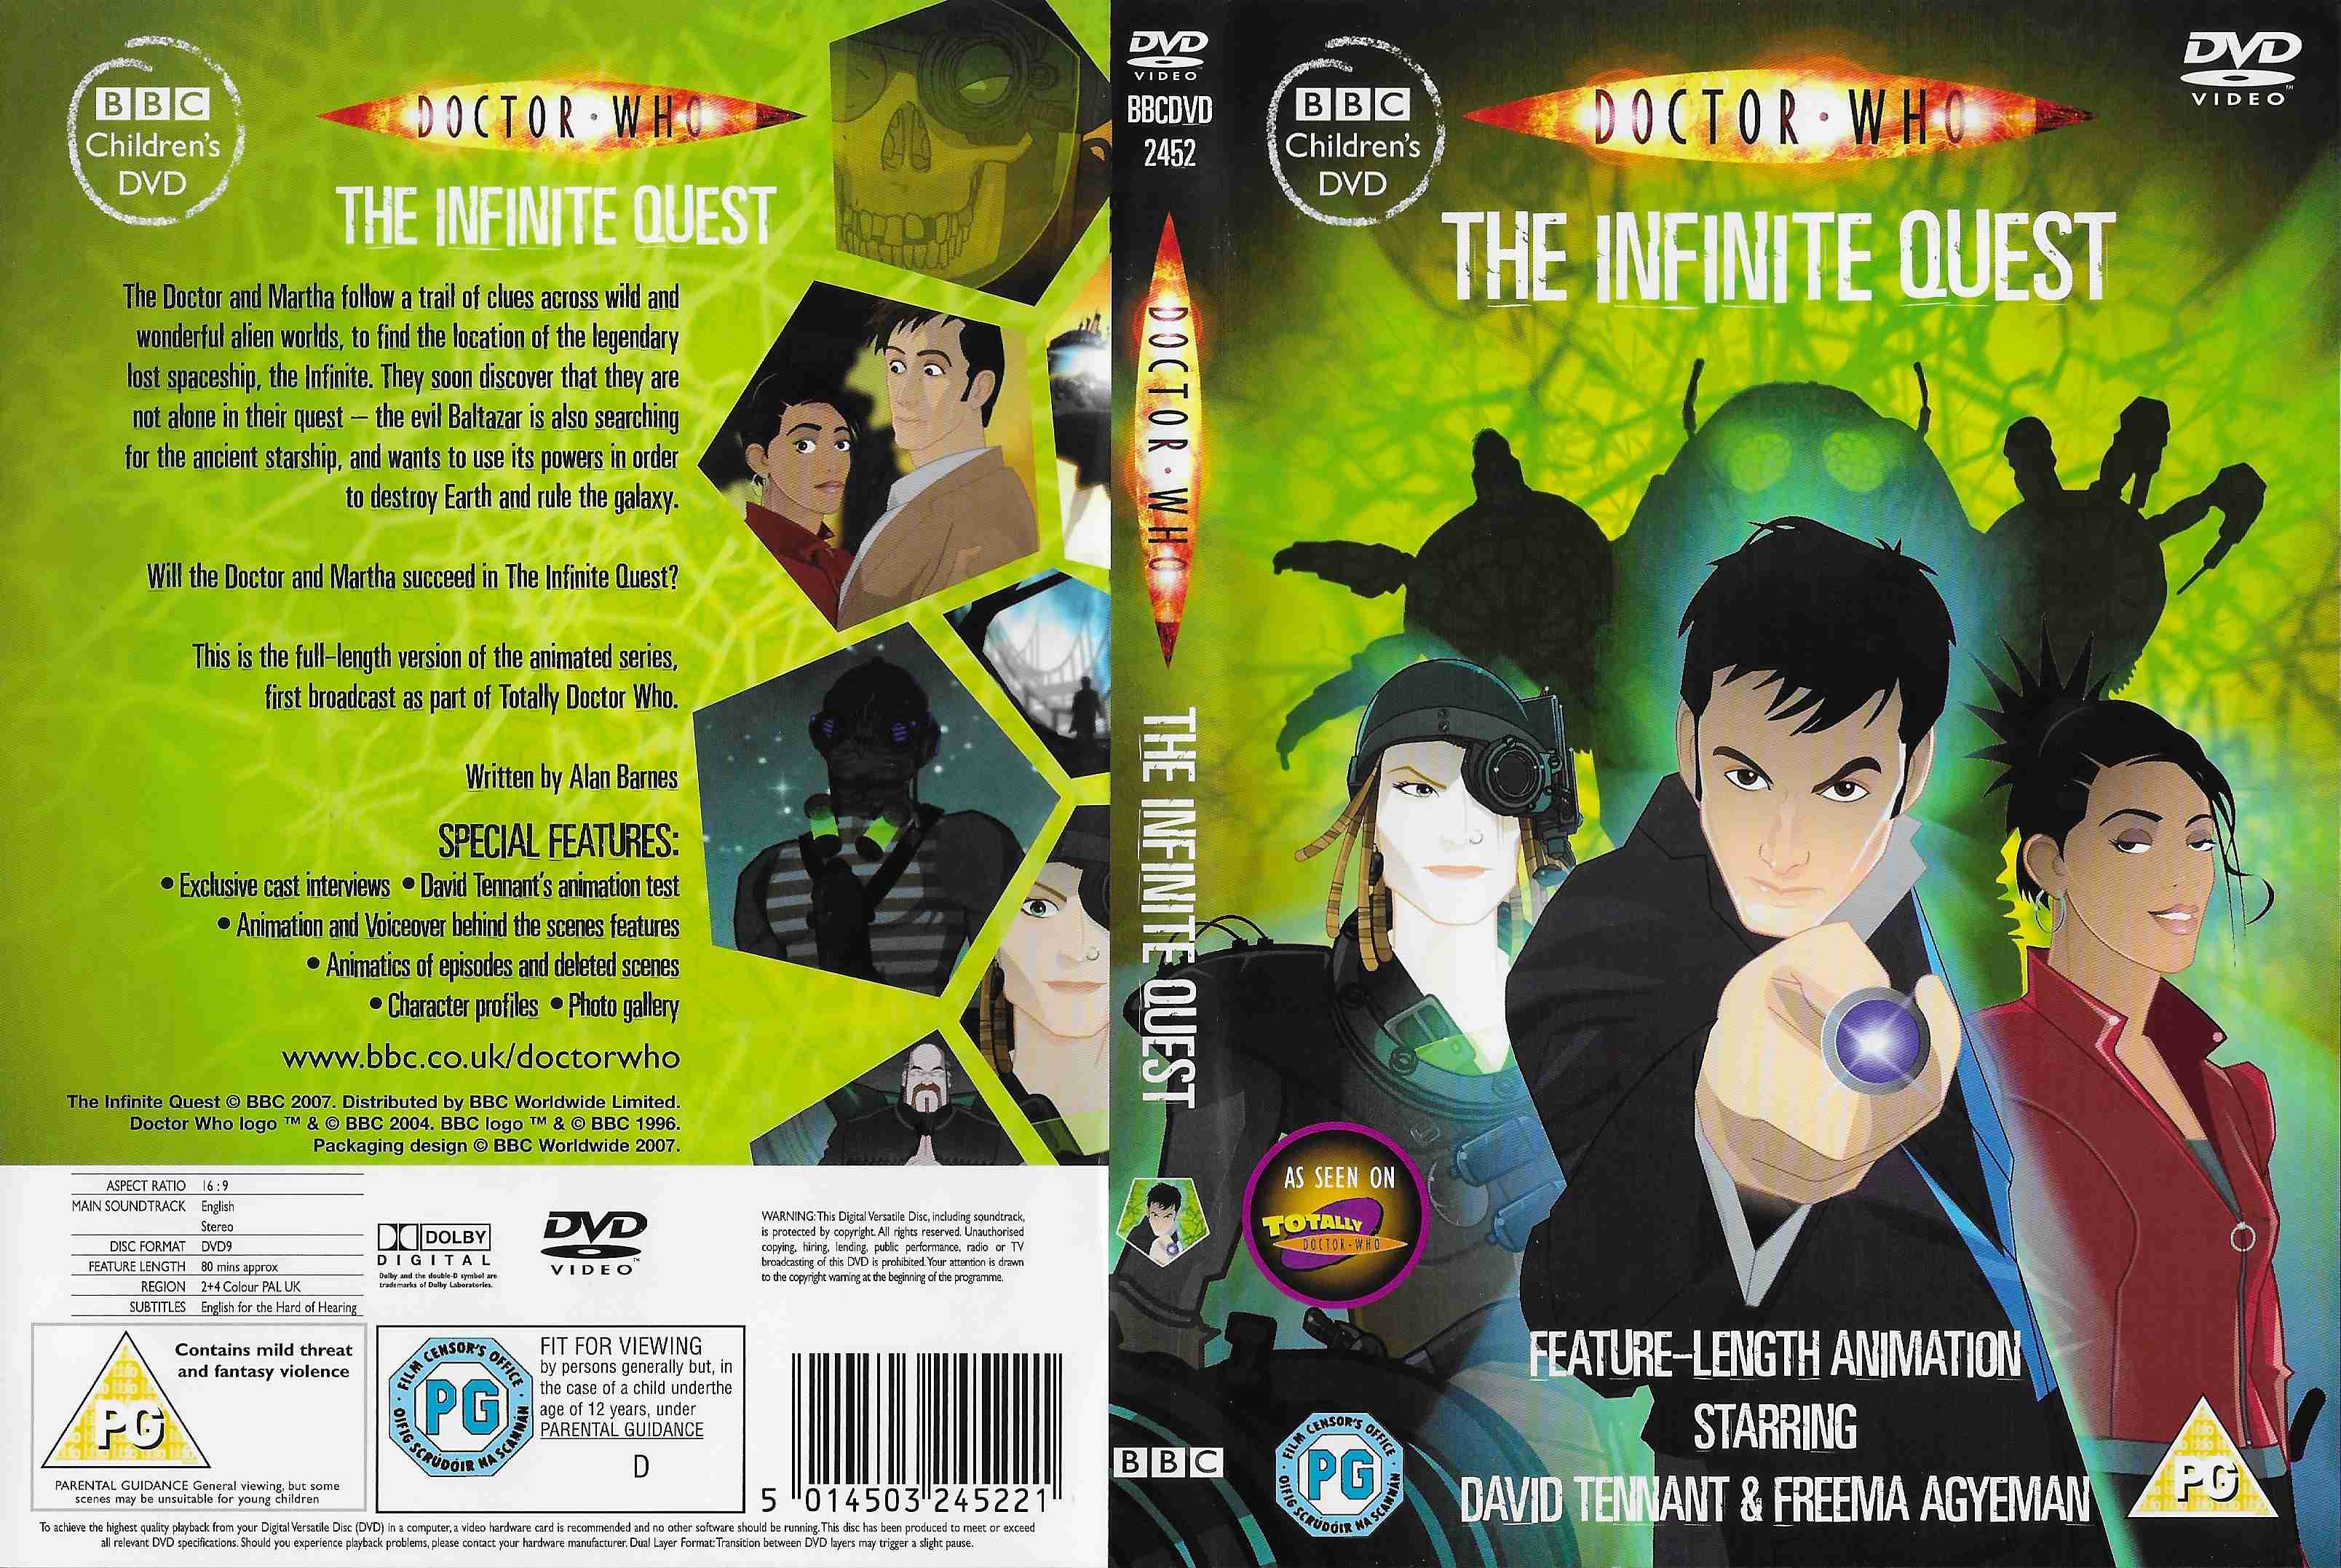 Picture of BBCDVD 2452 Doctor Who - The infinite quest by artist Alan Barnes from the BBC records and Tapes library